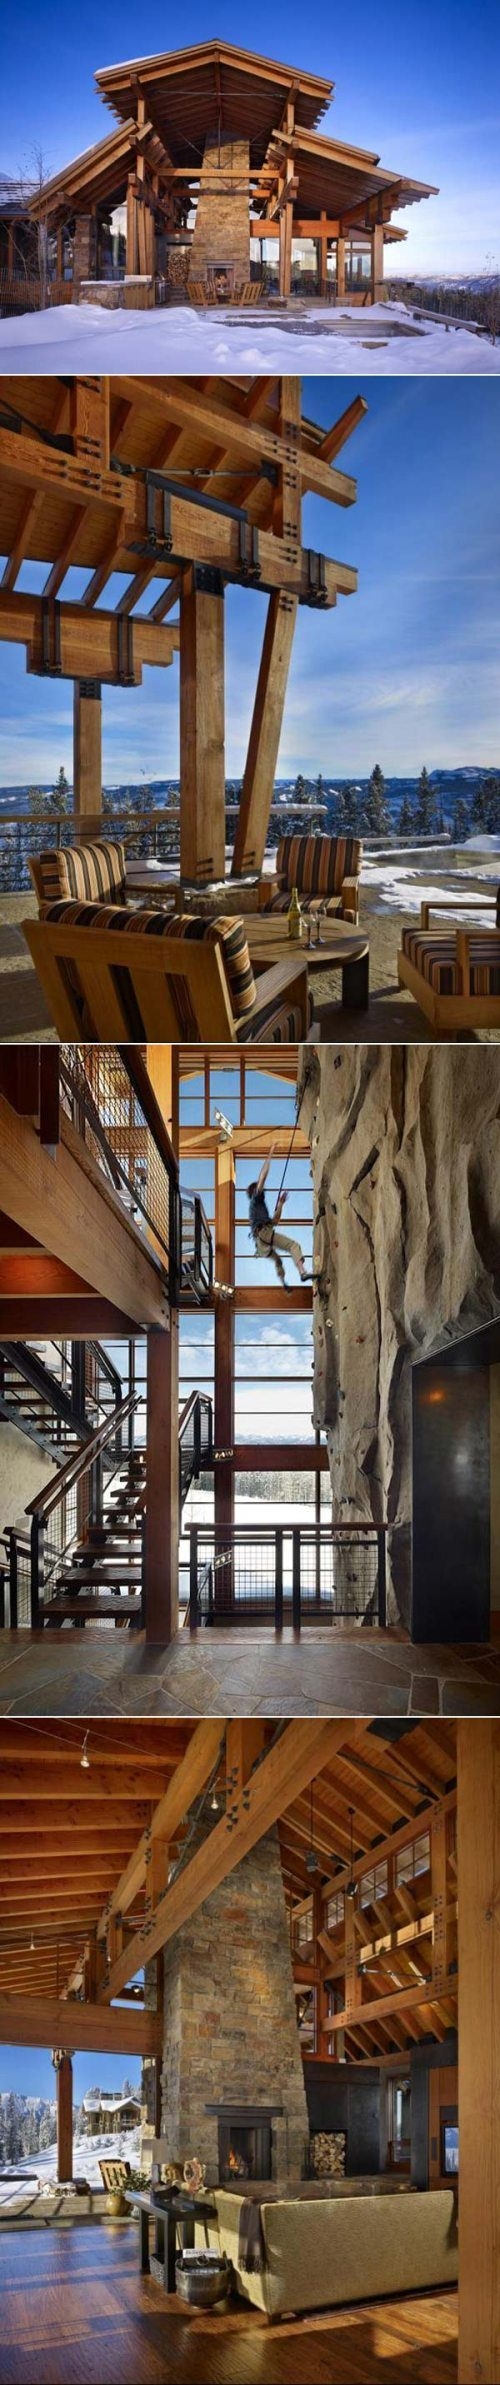 Post and beam mountain chalet with an indoor climbing wall